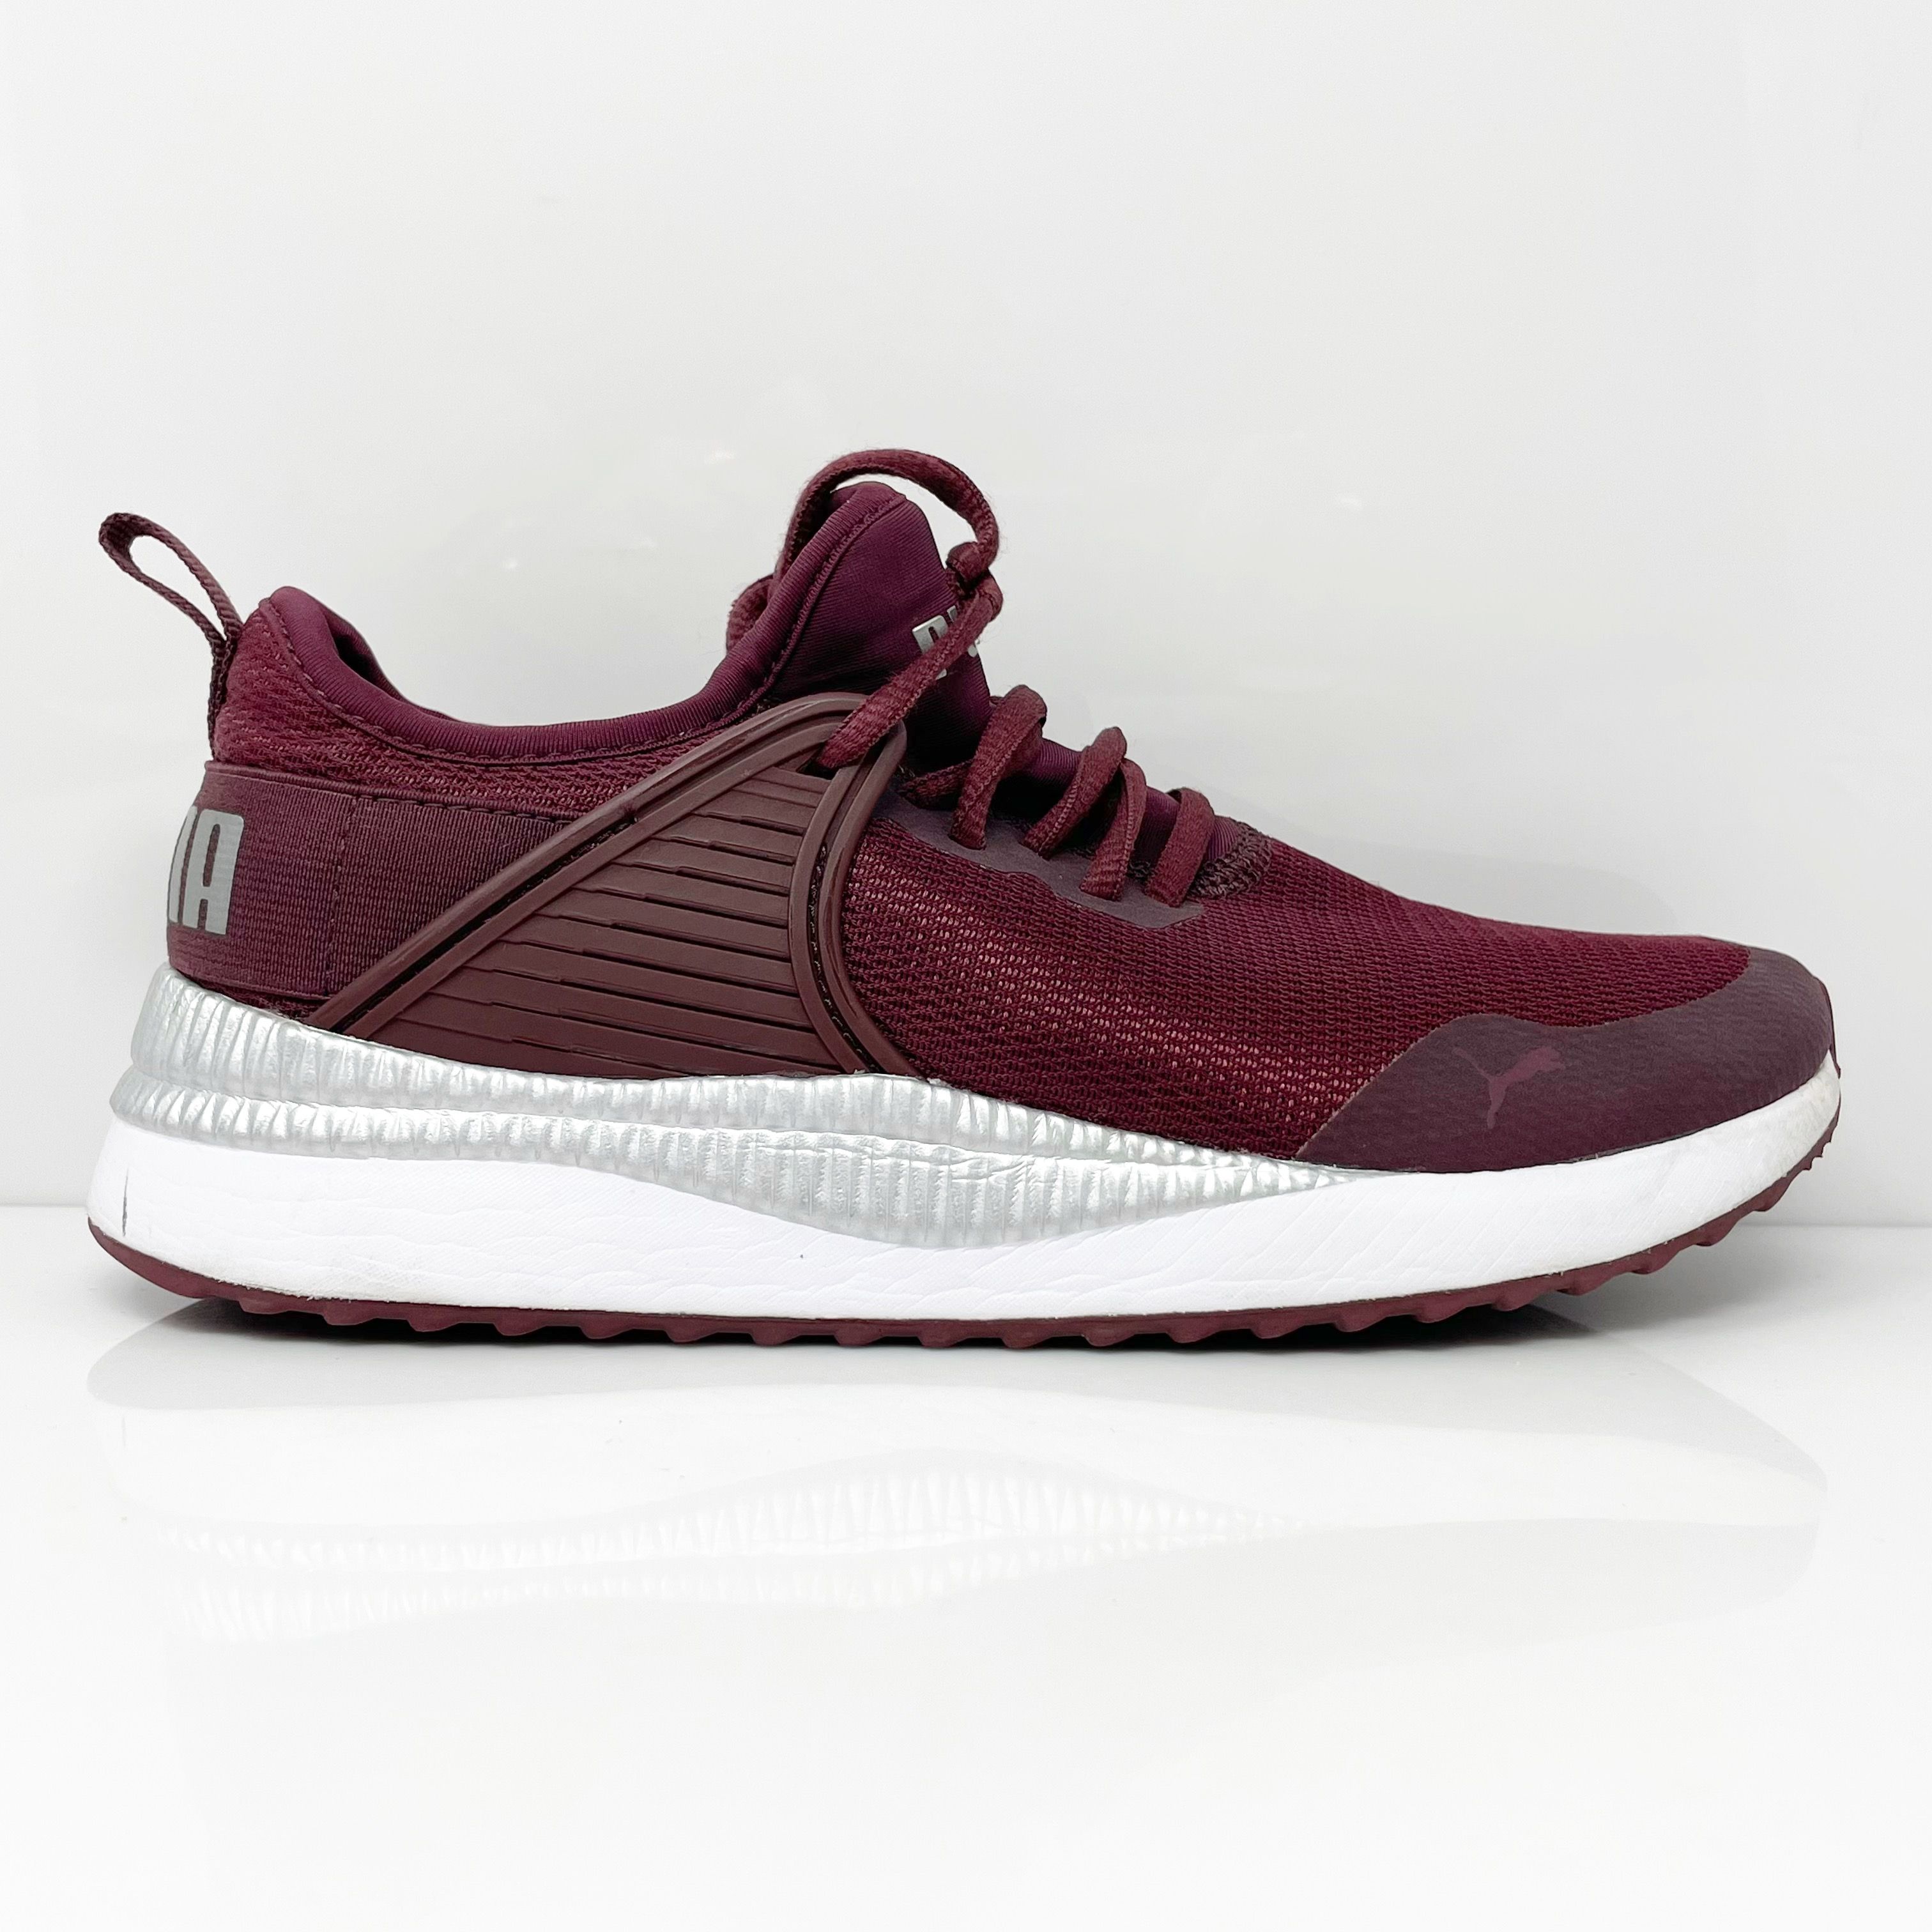 Кроссовки Puma Womens Pacer Next Cage 368066 02 Red кроссовки размер 7